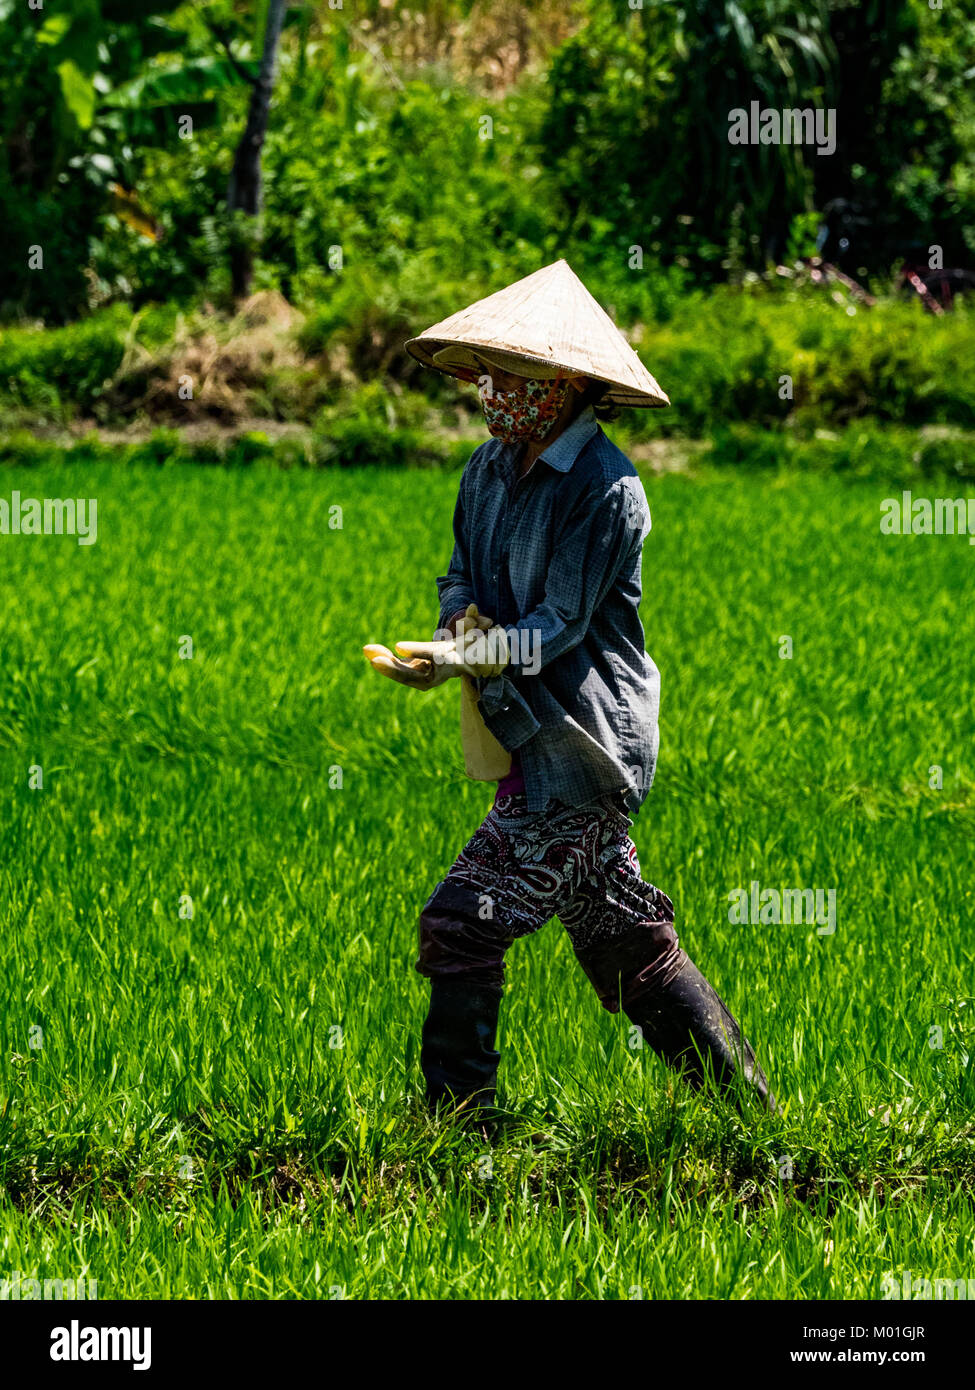 Rice pickers in Hoi An Stock Photo